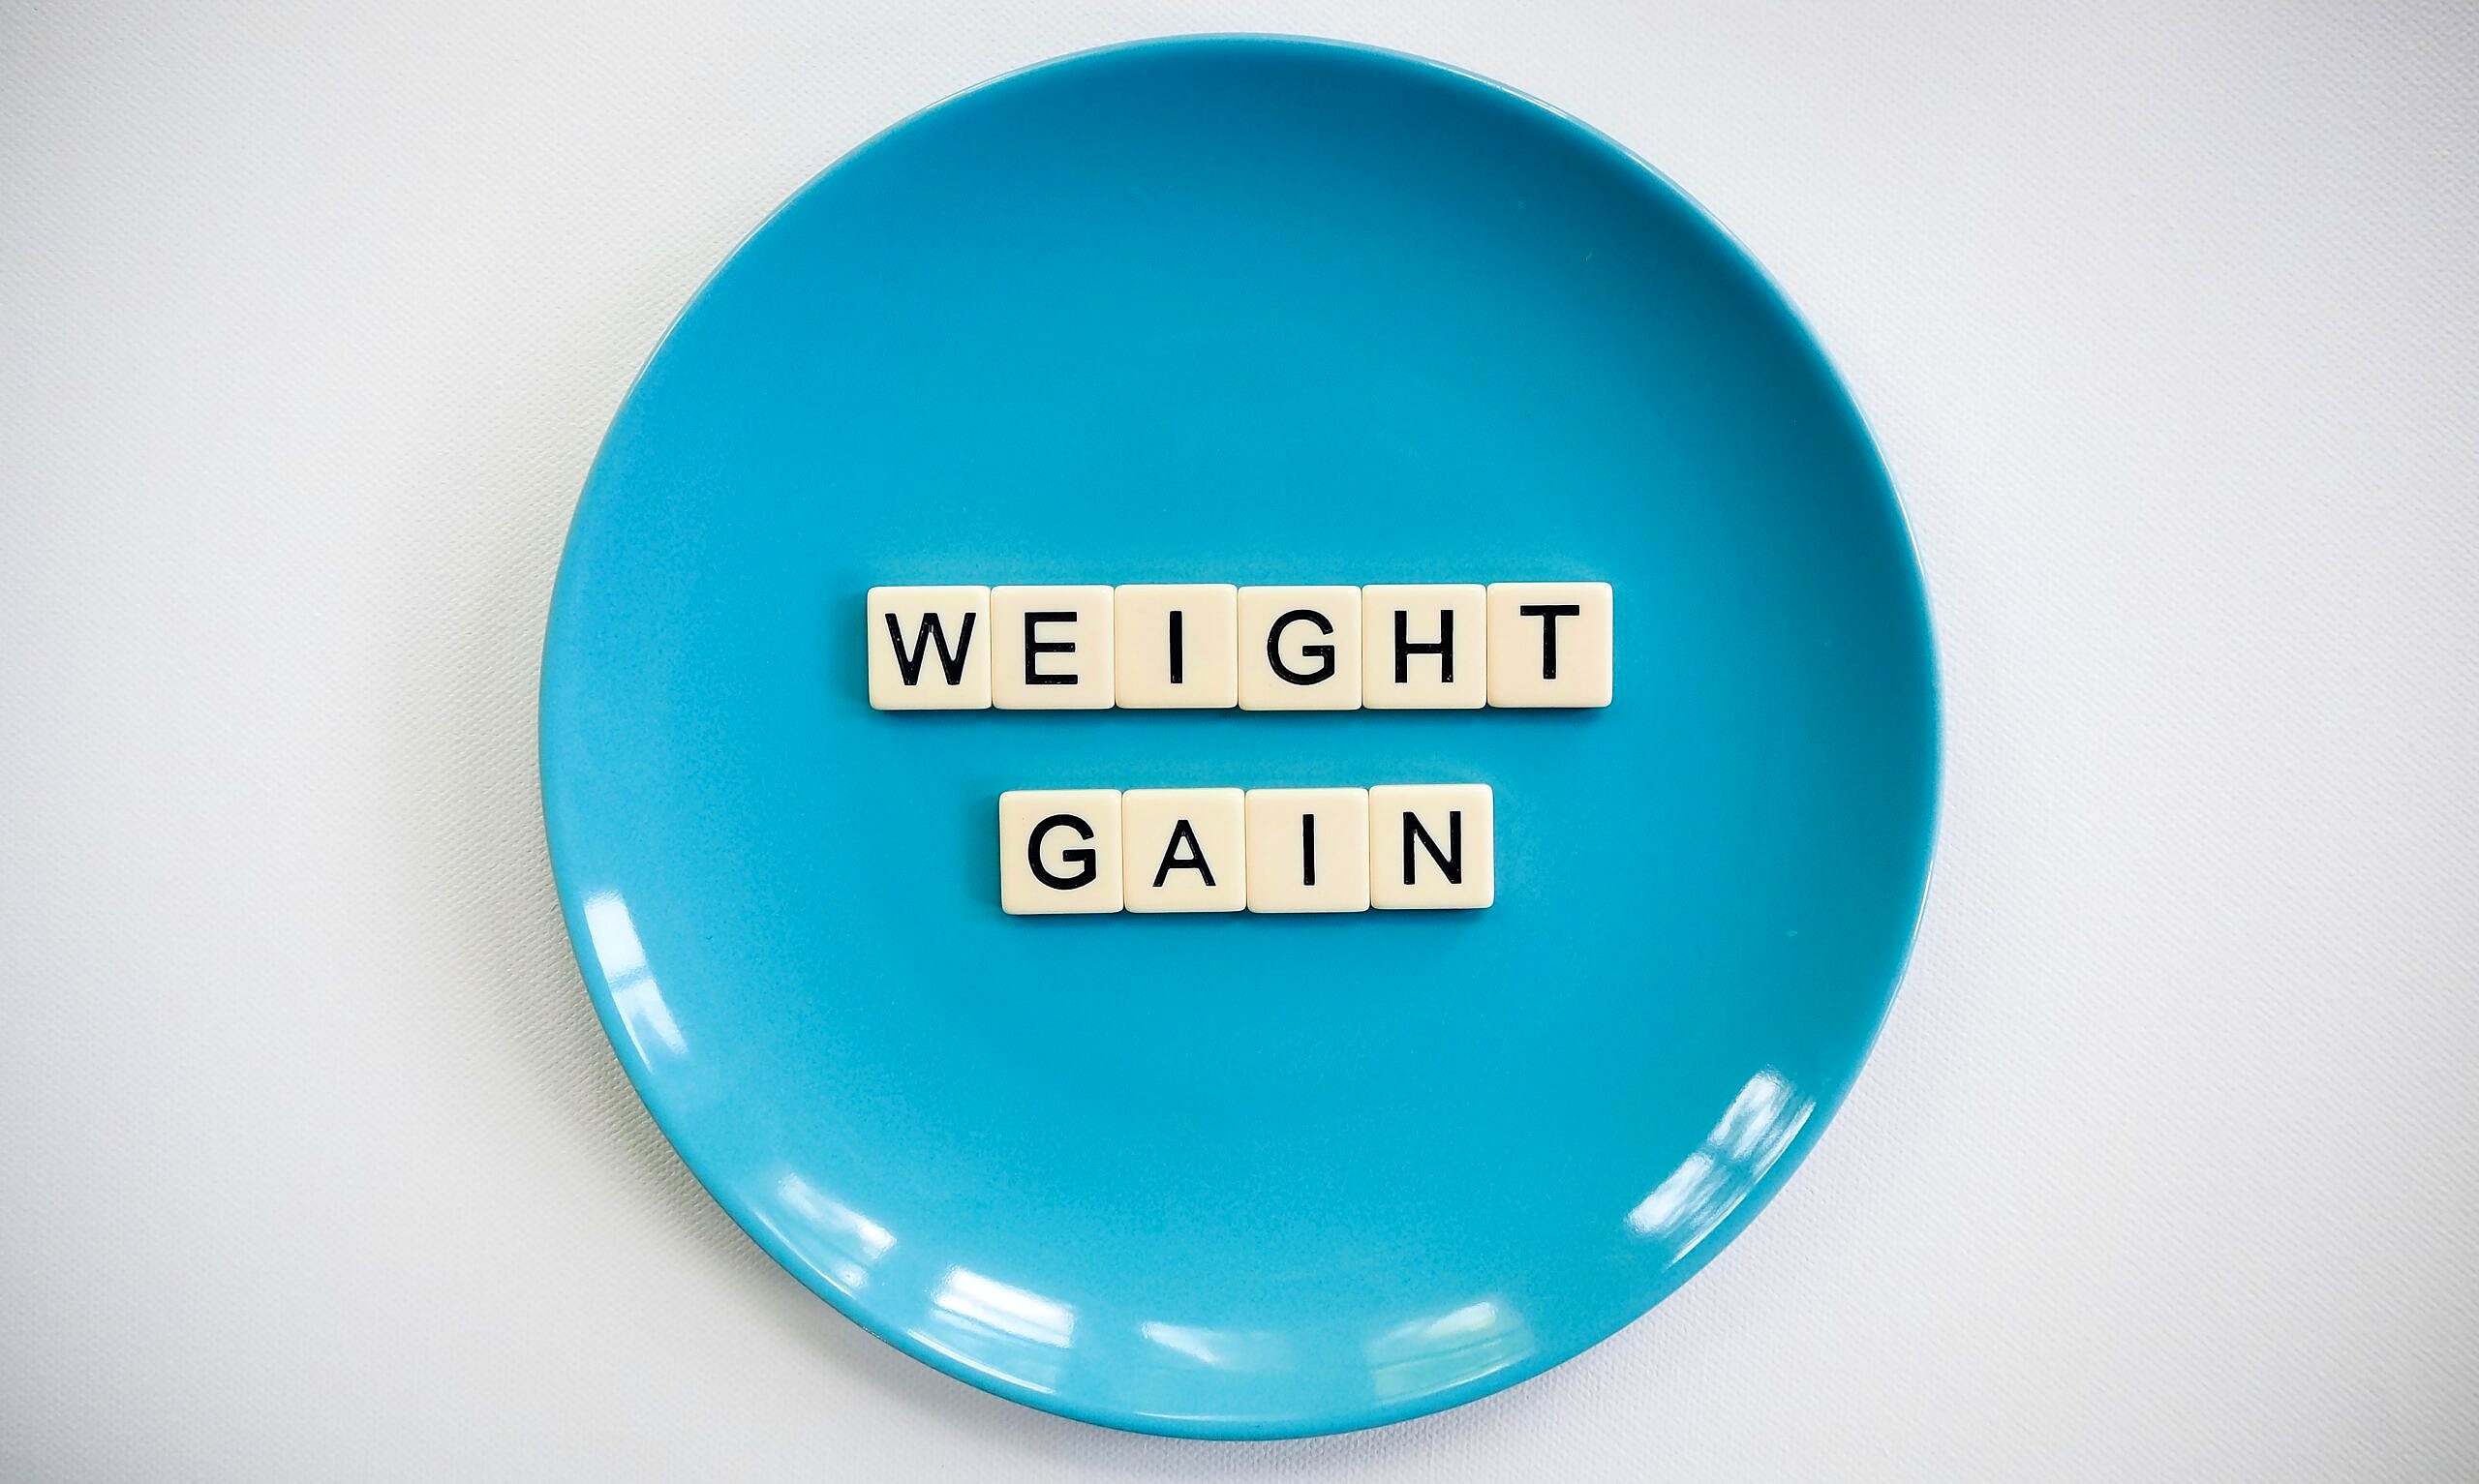 Blue plate with text saying "weight gain".